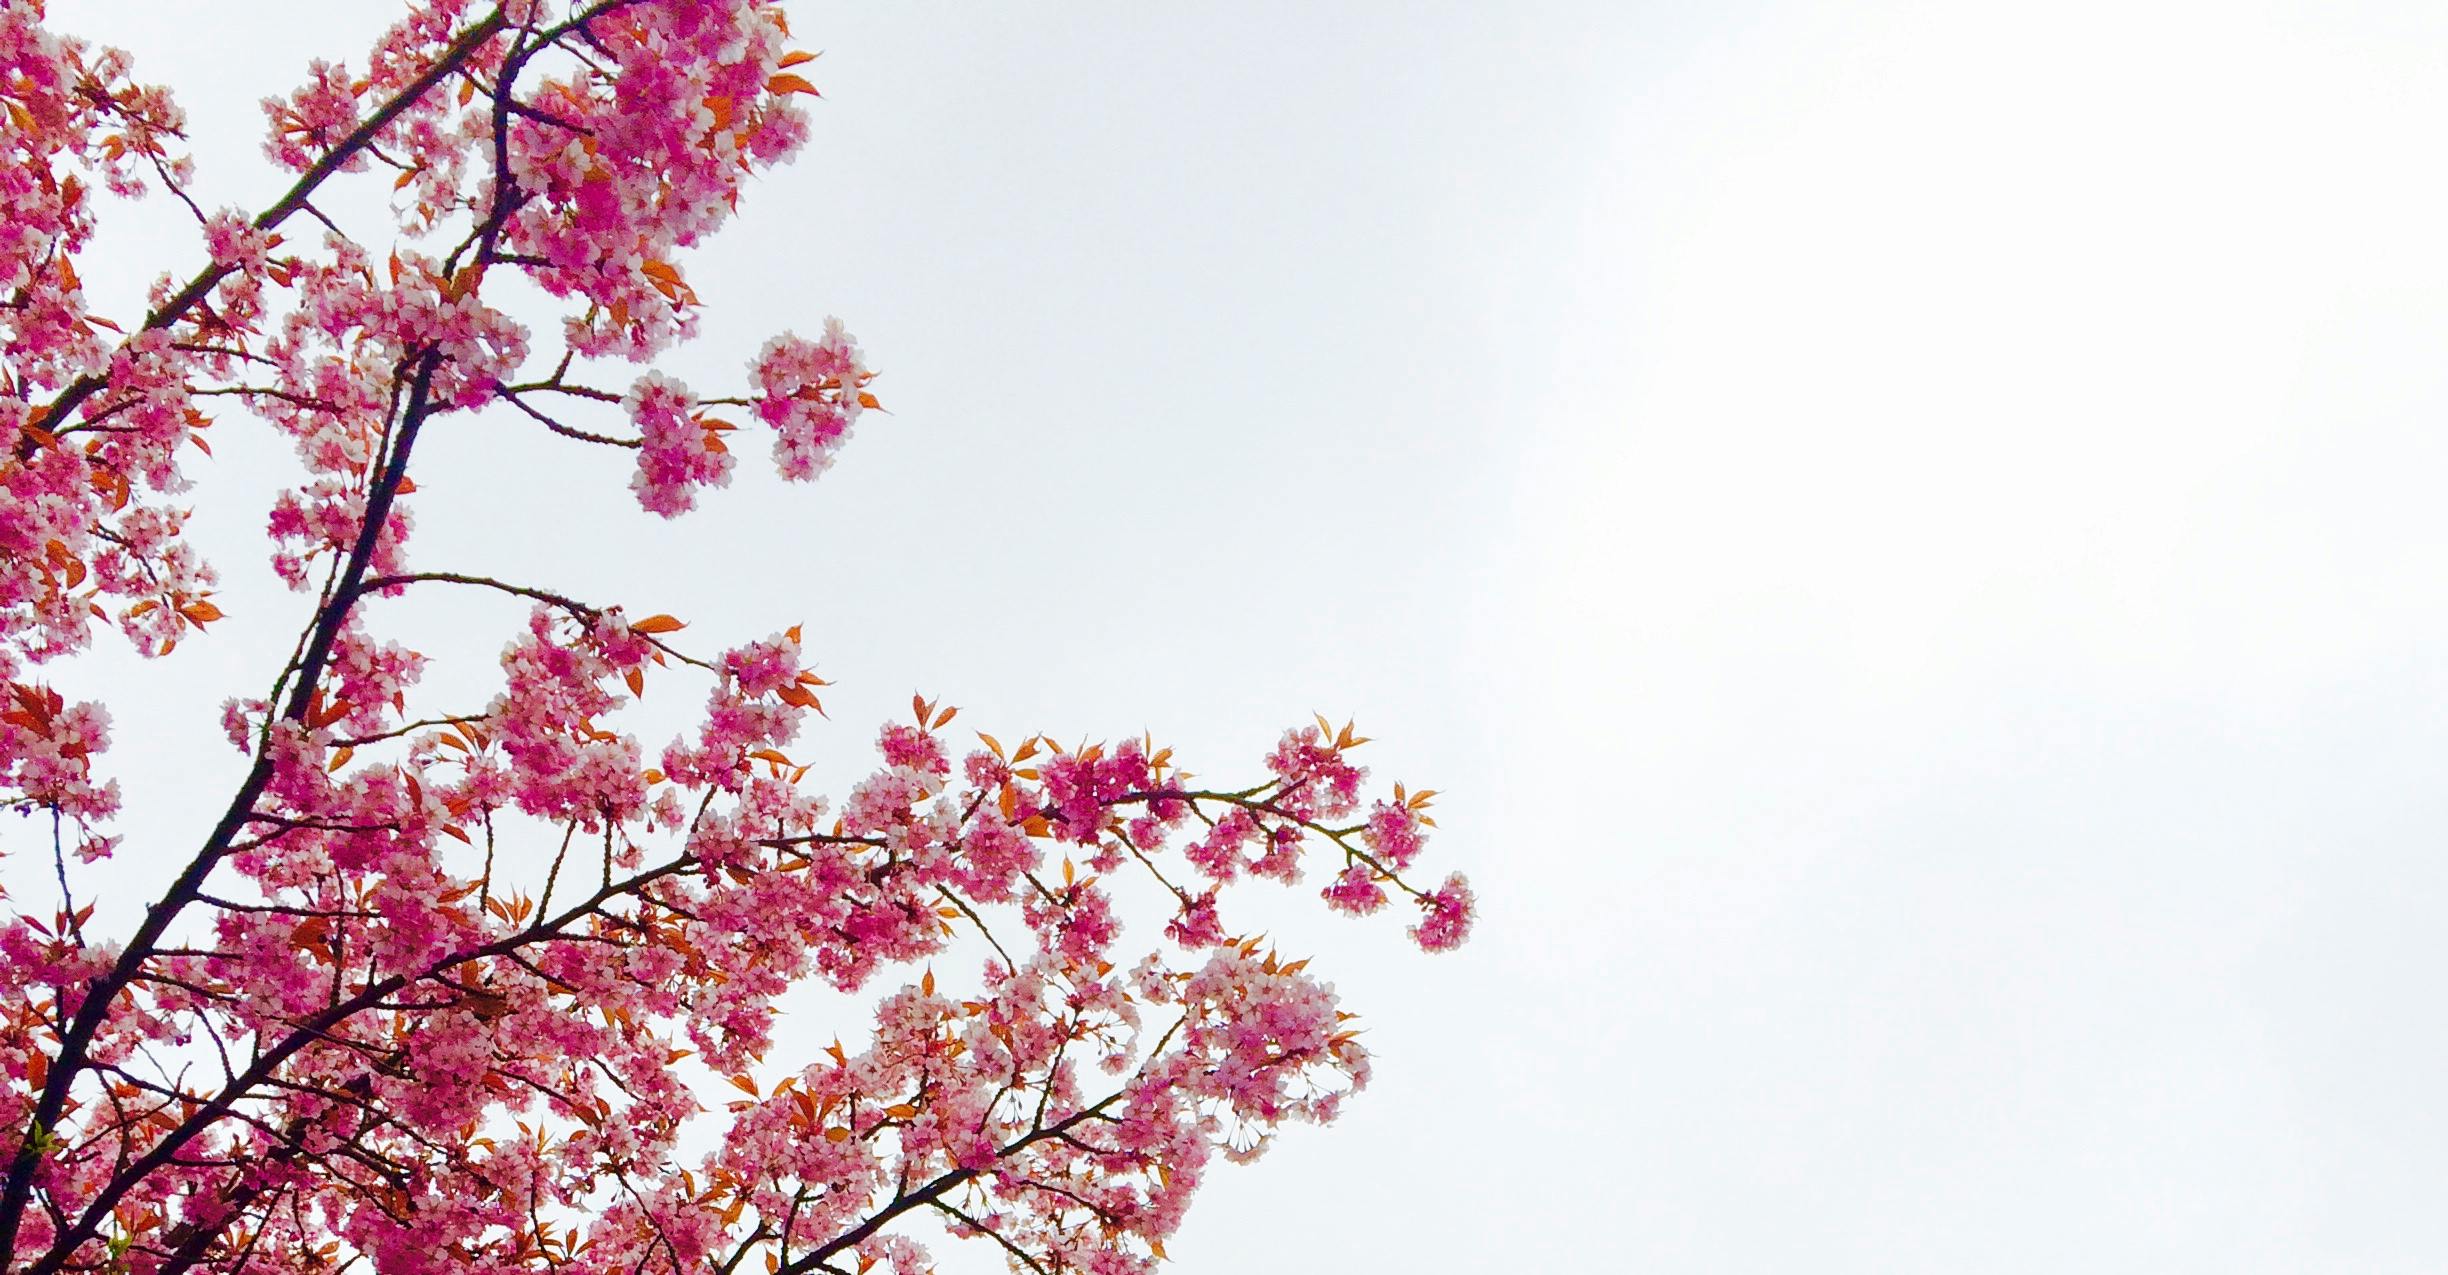 23,276 Cherry Blossom Realistic Royalty-Free Photos and Stock